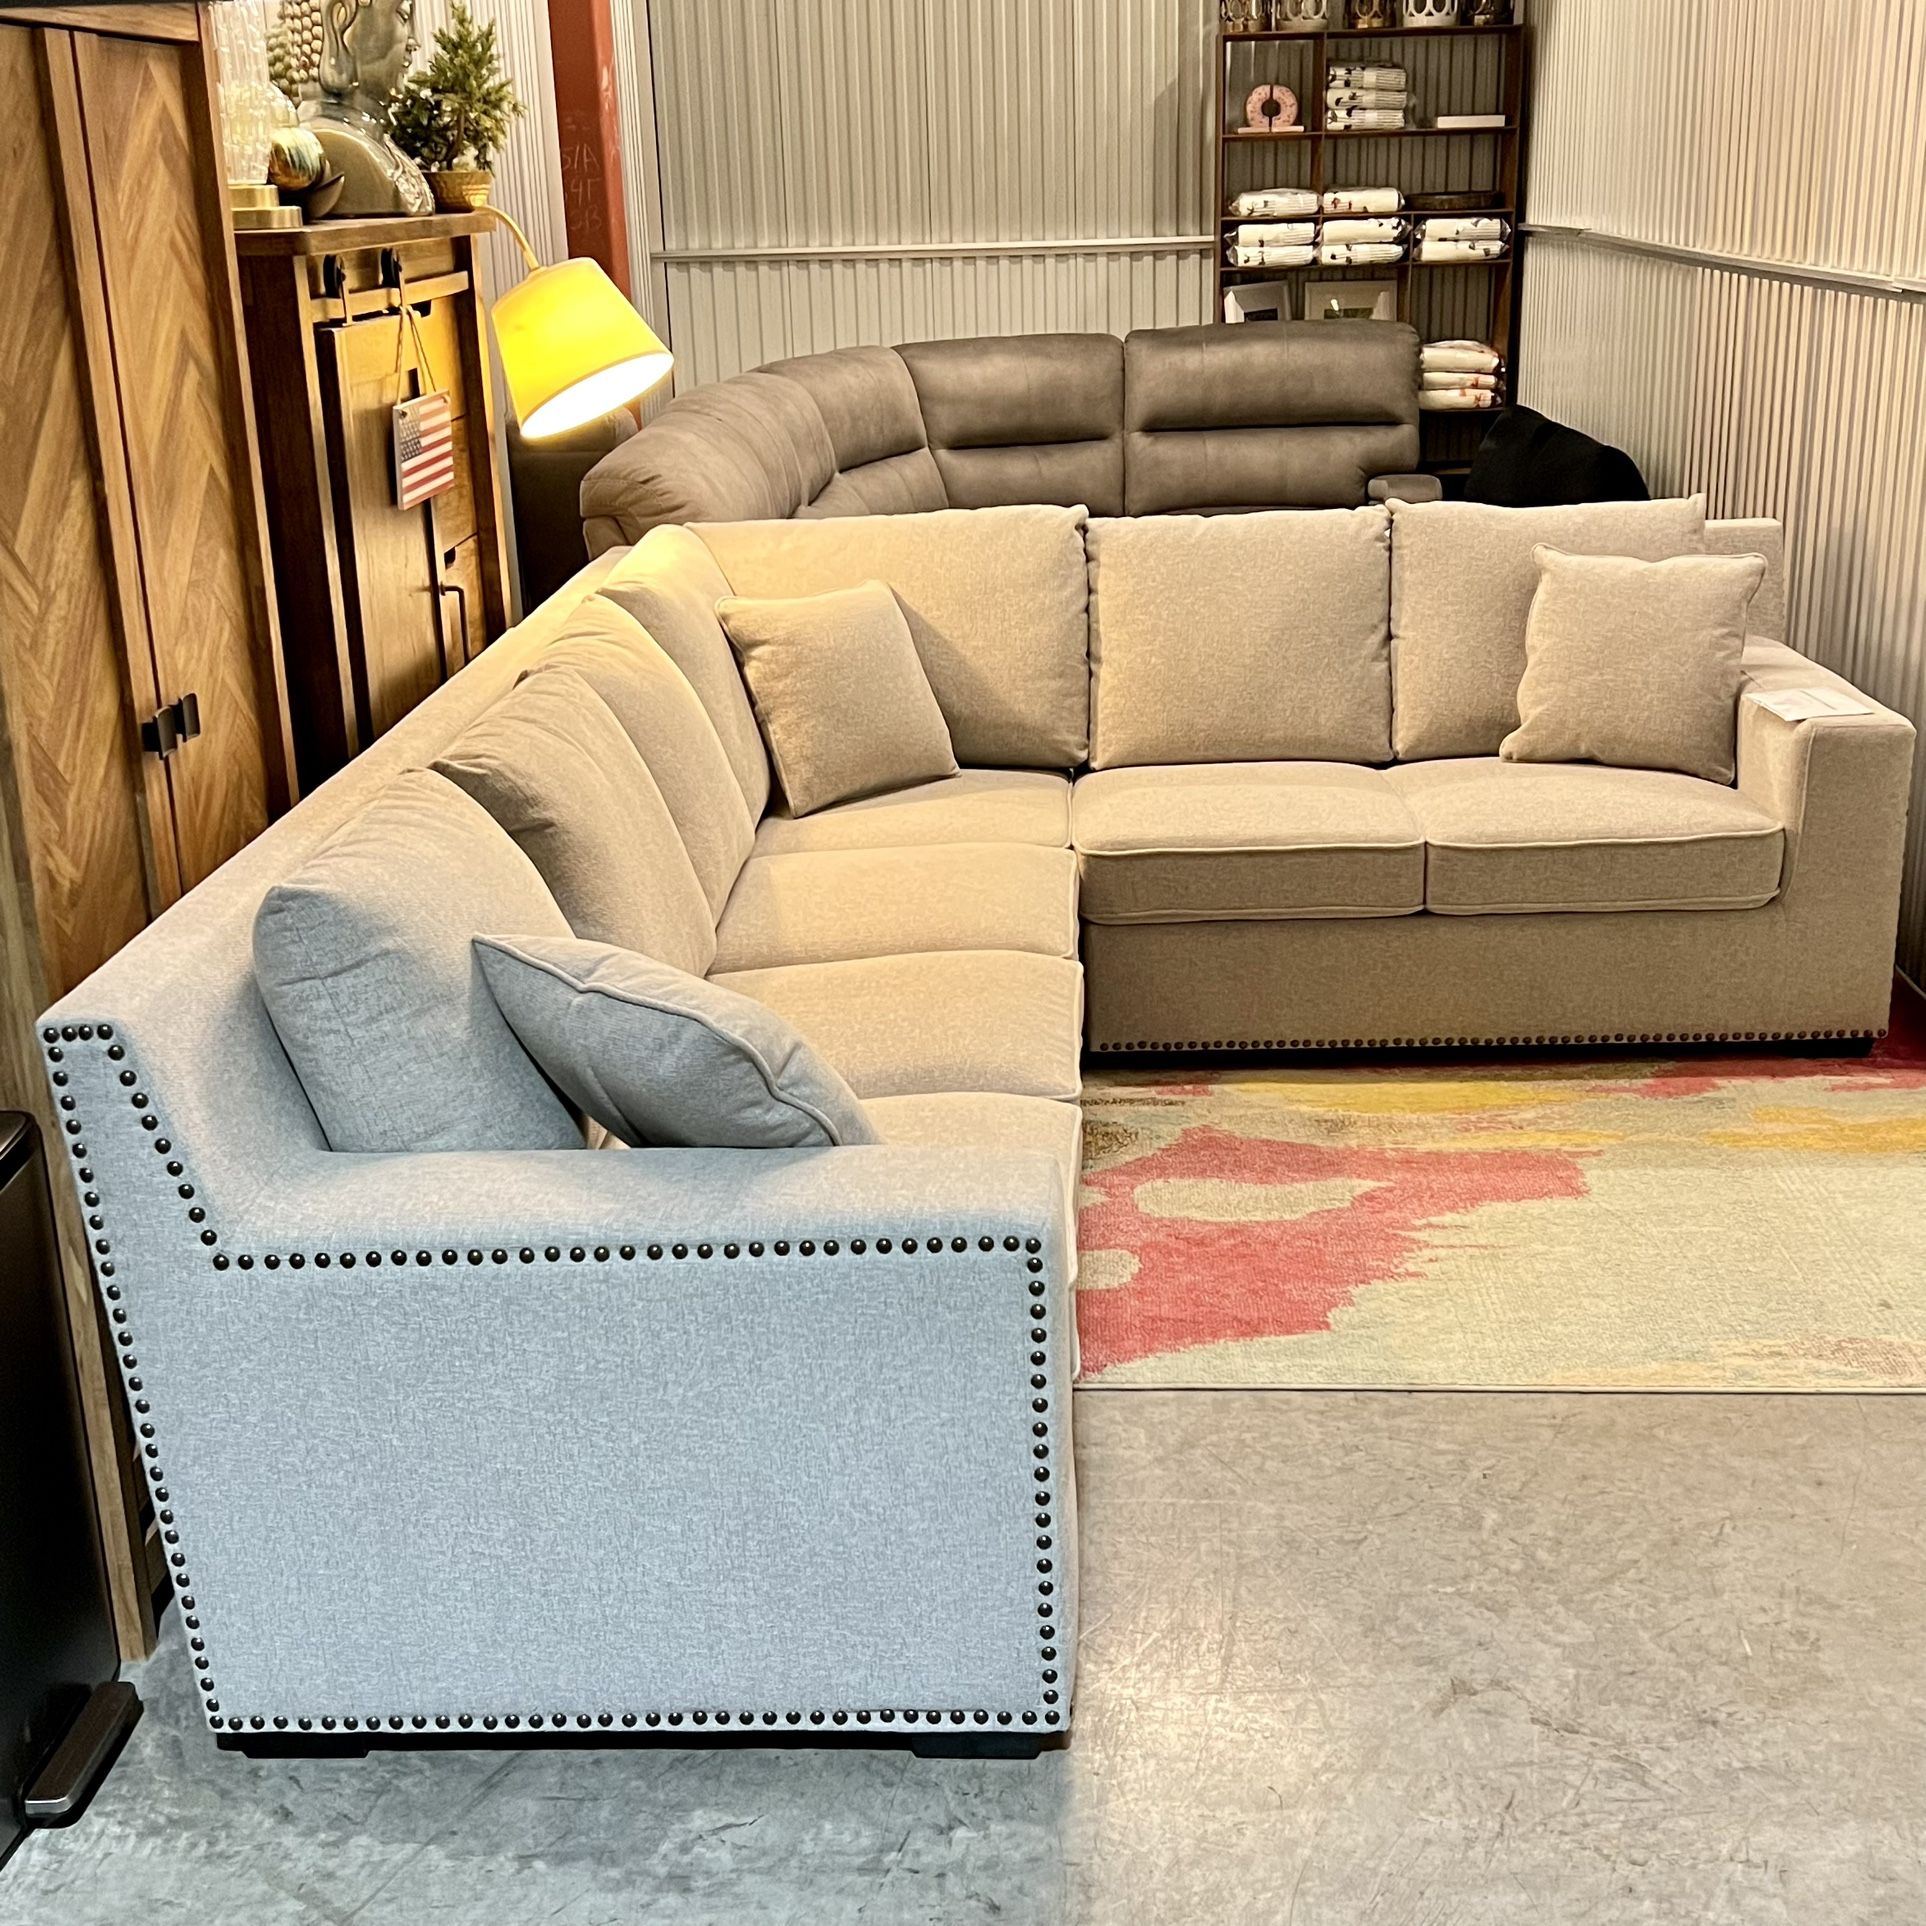 Free Delivery Today Brand New in Box Unopened Abbyson Light Gray Fabric Sectional (Costco MSRP $3,399+tax)